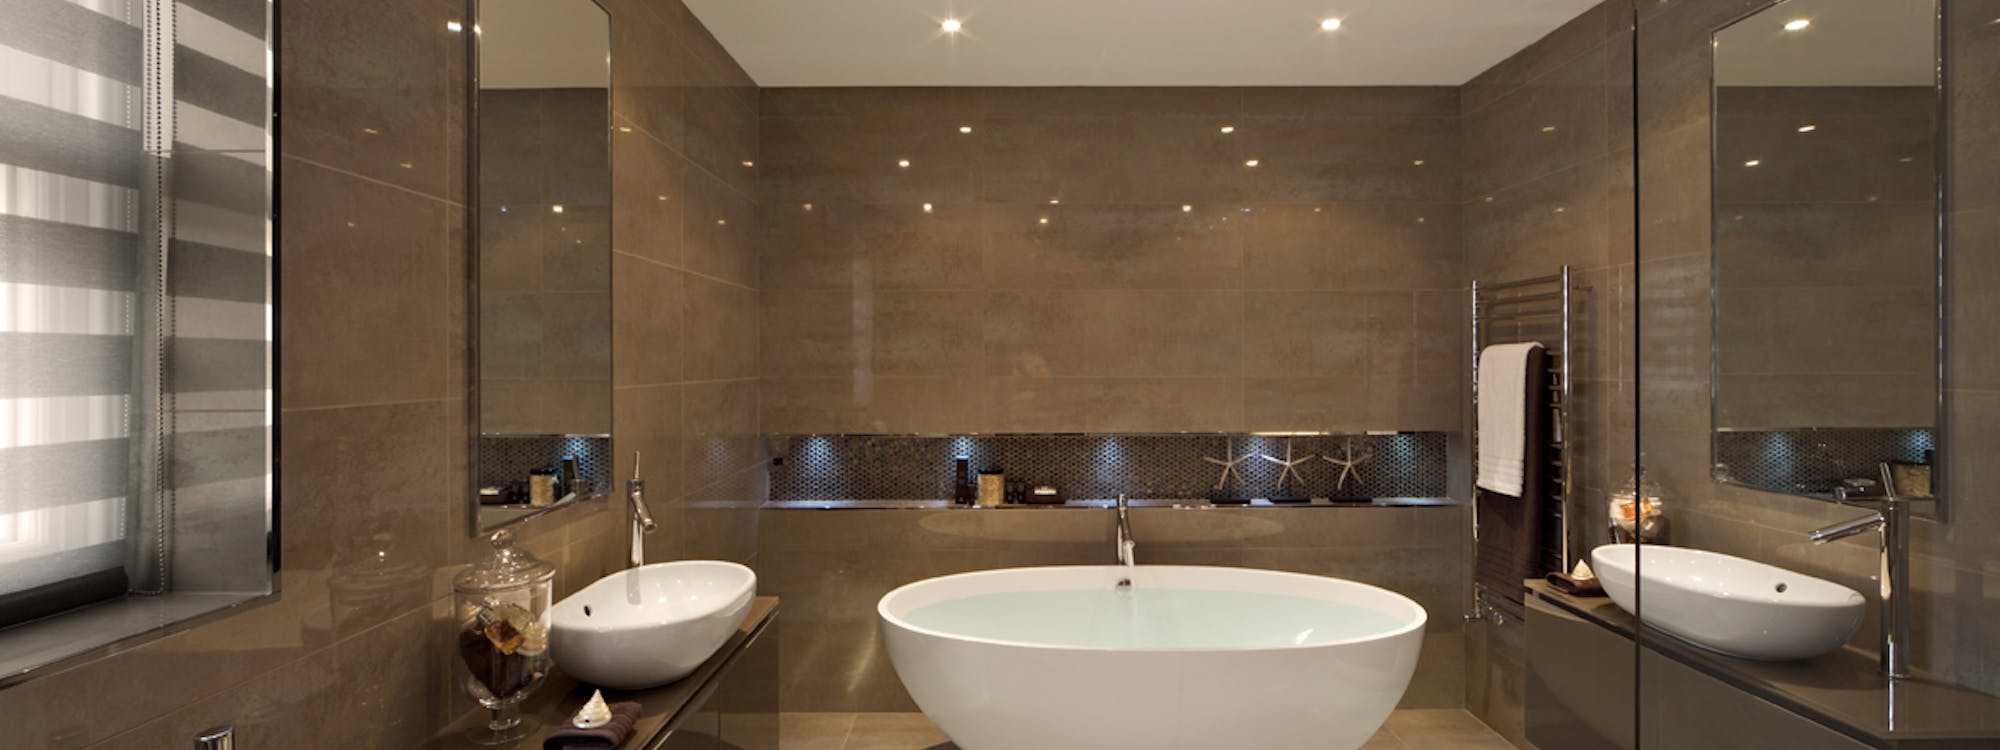 internal improvements - bespoke bathrooms designed, supplied, project managed & installed